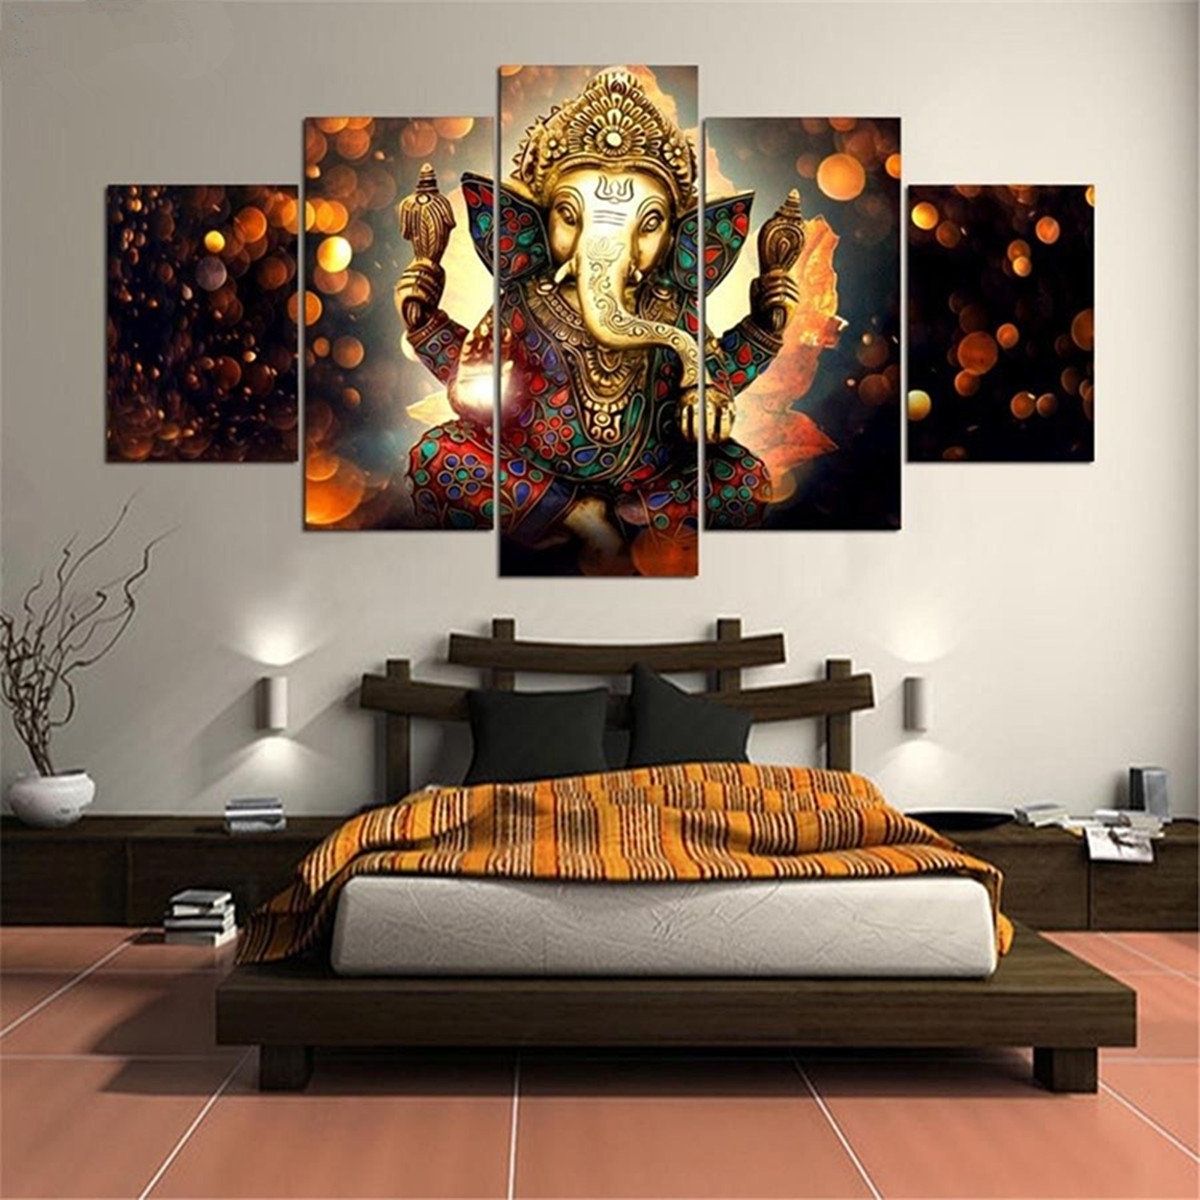 5 Pcs Ganesha Painting Abstract Picture Modern Canvas Wall Art Throughout Most Recently Released Abstract Ganesha Wall Art (View 5 of 20)